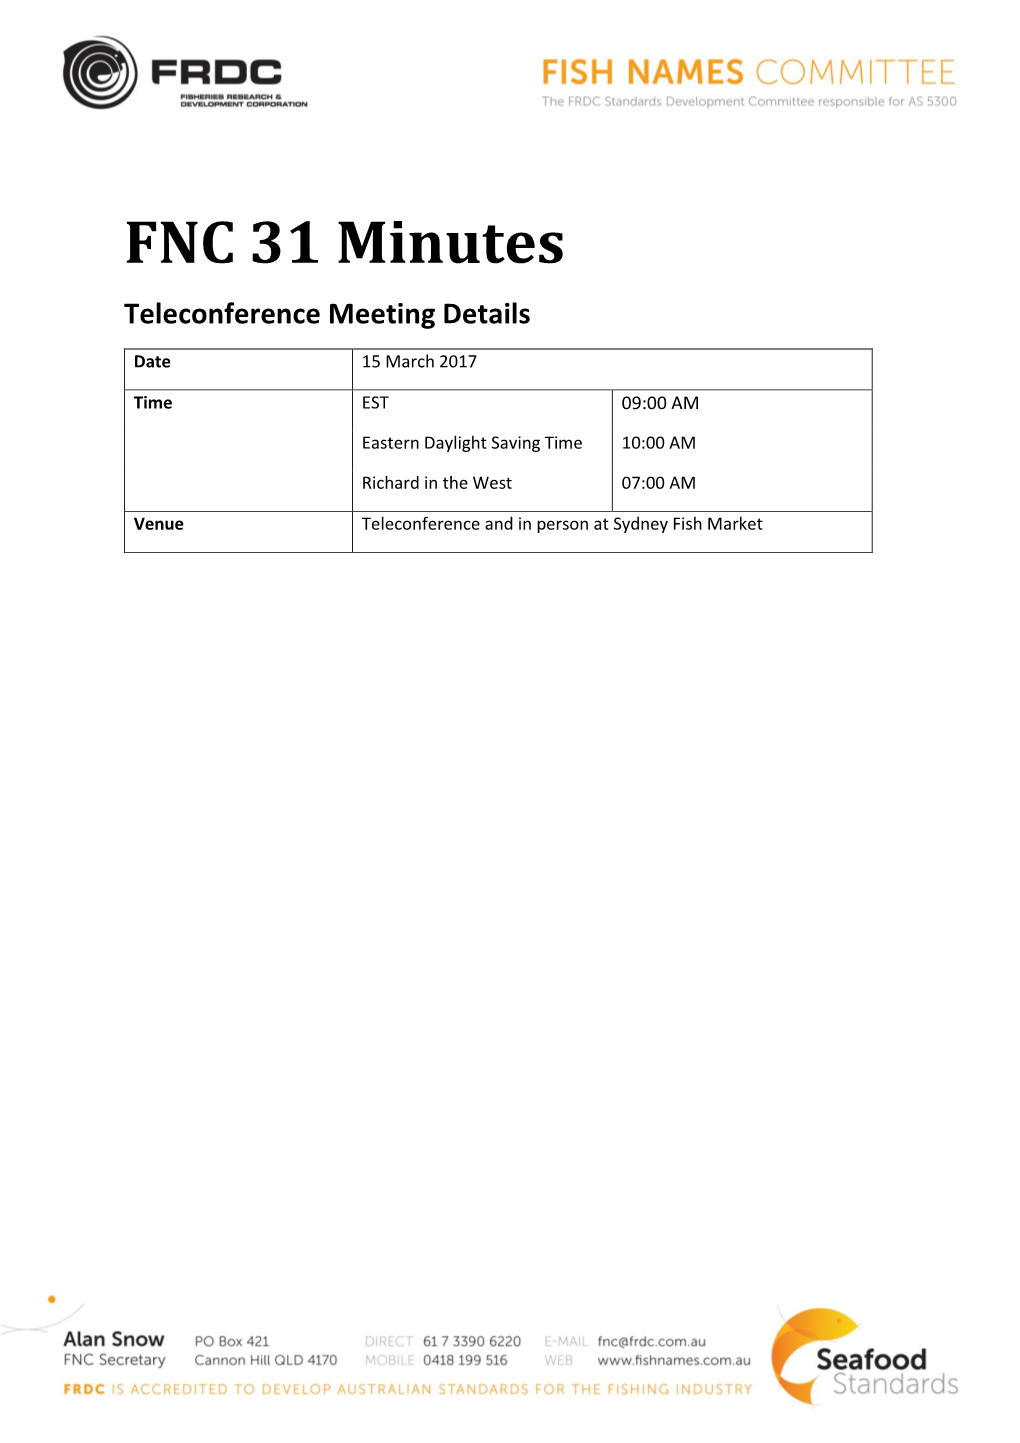 FNC 31 Minutes Teleconference Meeting Details